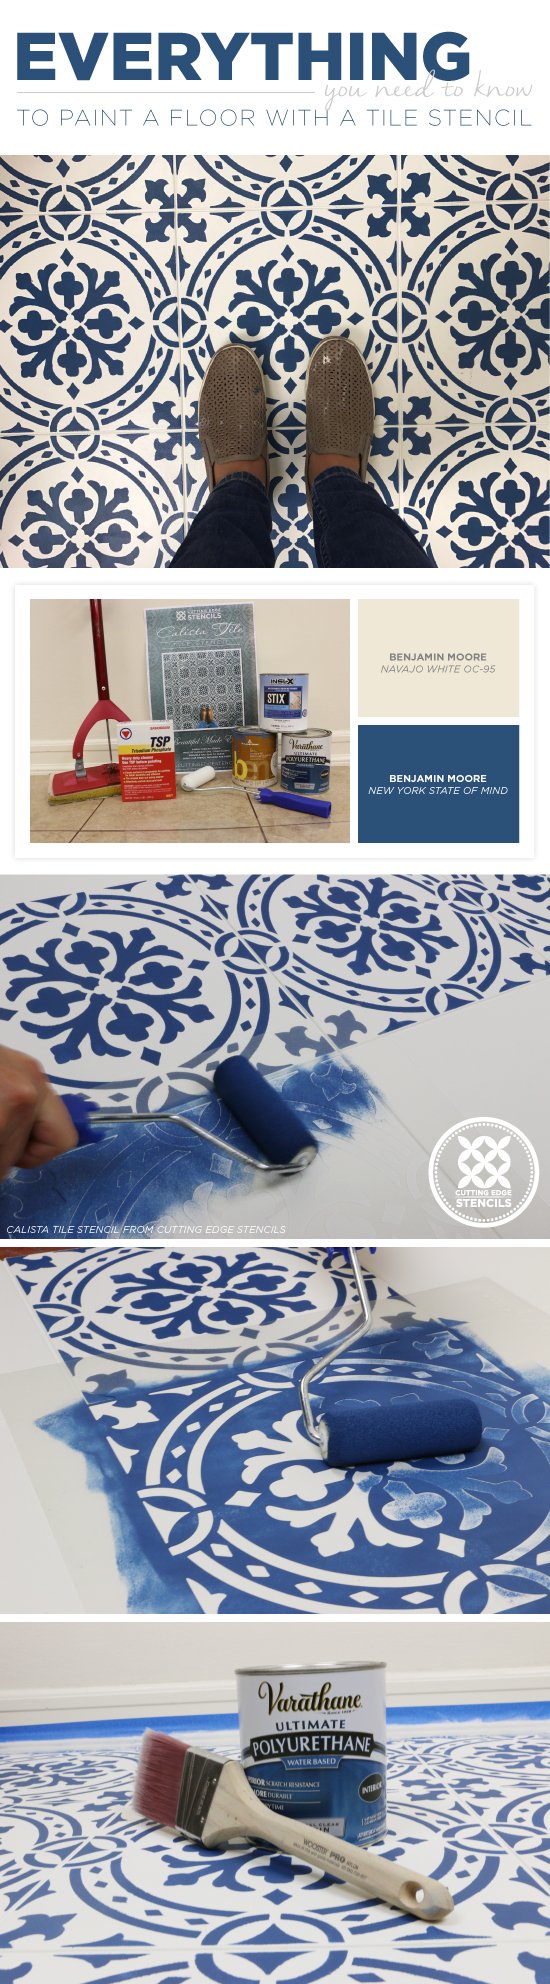 Cutting Edge Stencils shares everything you need to know to paint and stencil a floor using the Calista Tile Stencil from Cutting Edge Stencils. http://www.cuttingedgestencils.com/calista-tile-stencil-backsplash-cement-tiles-stencils.html